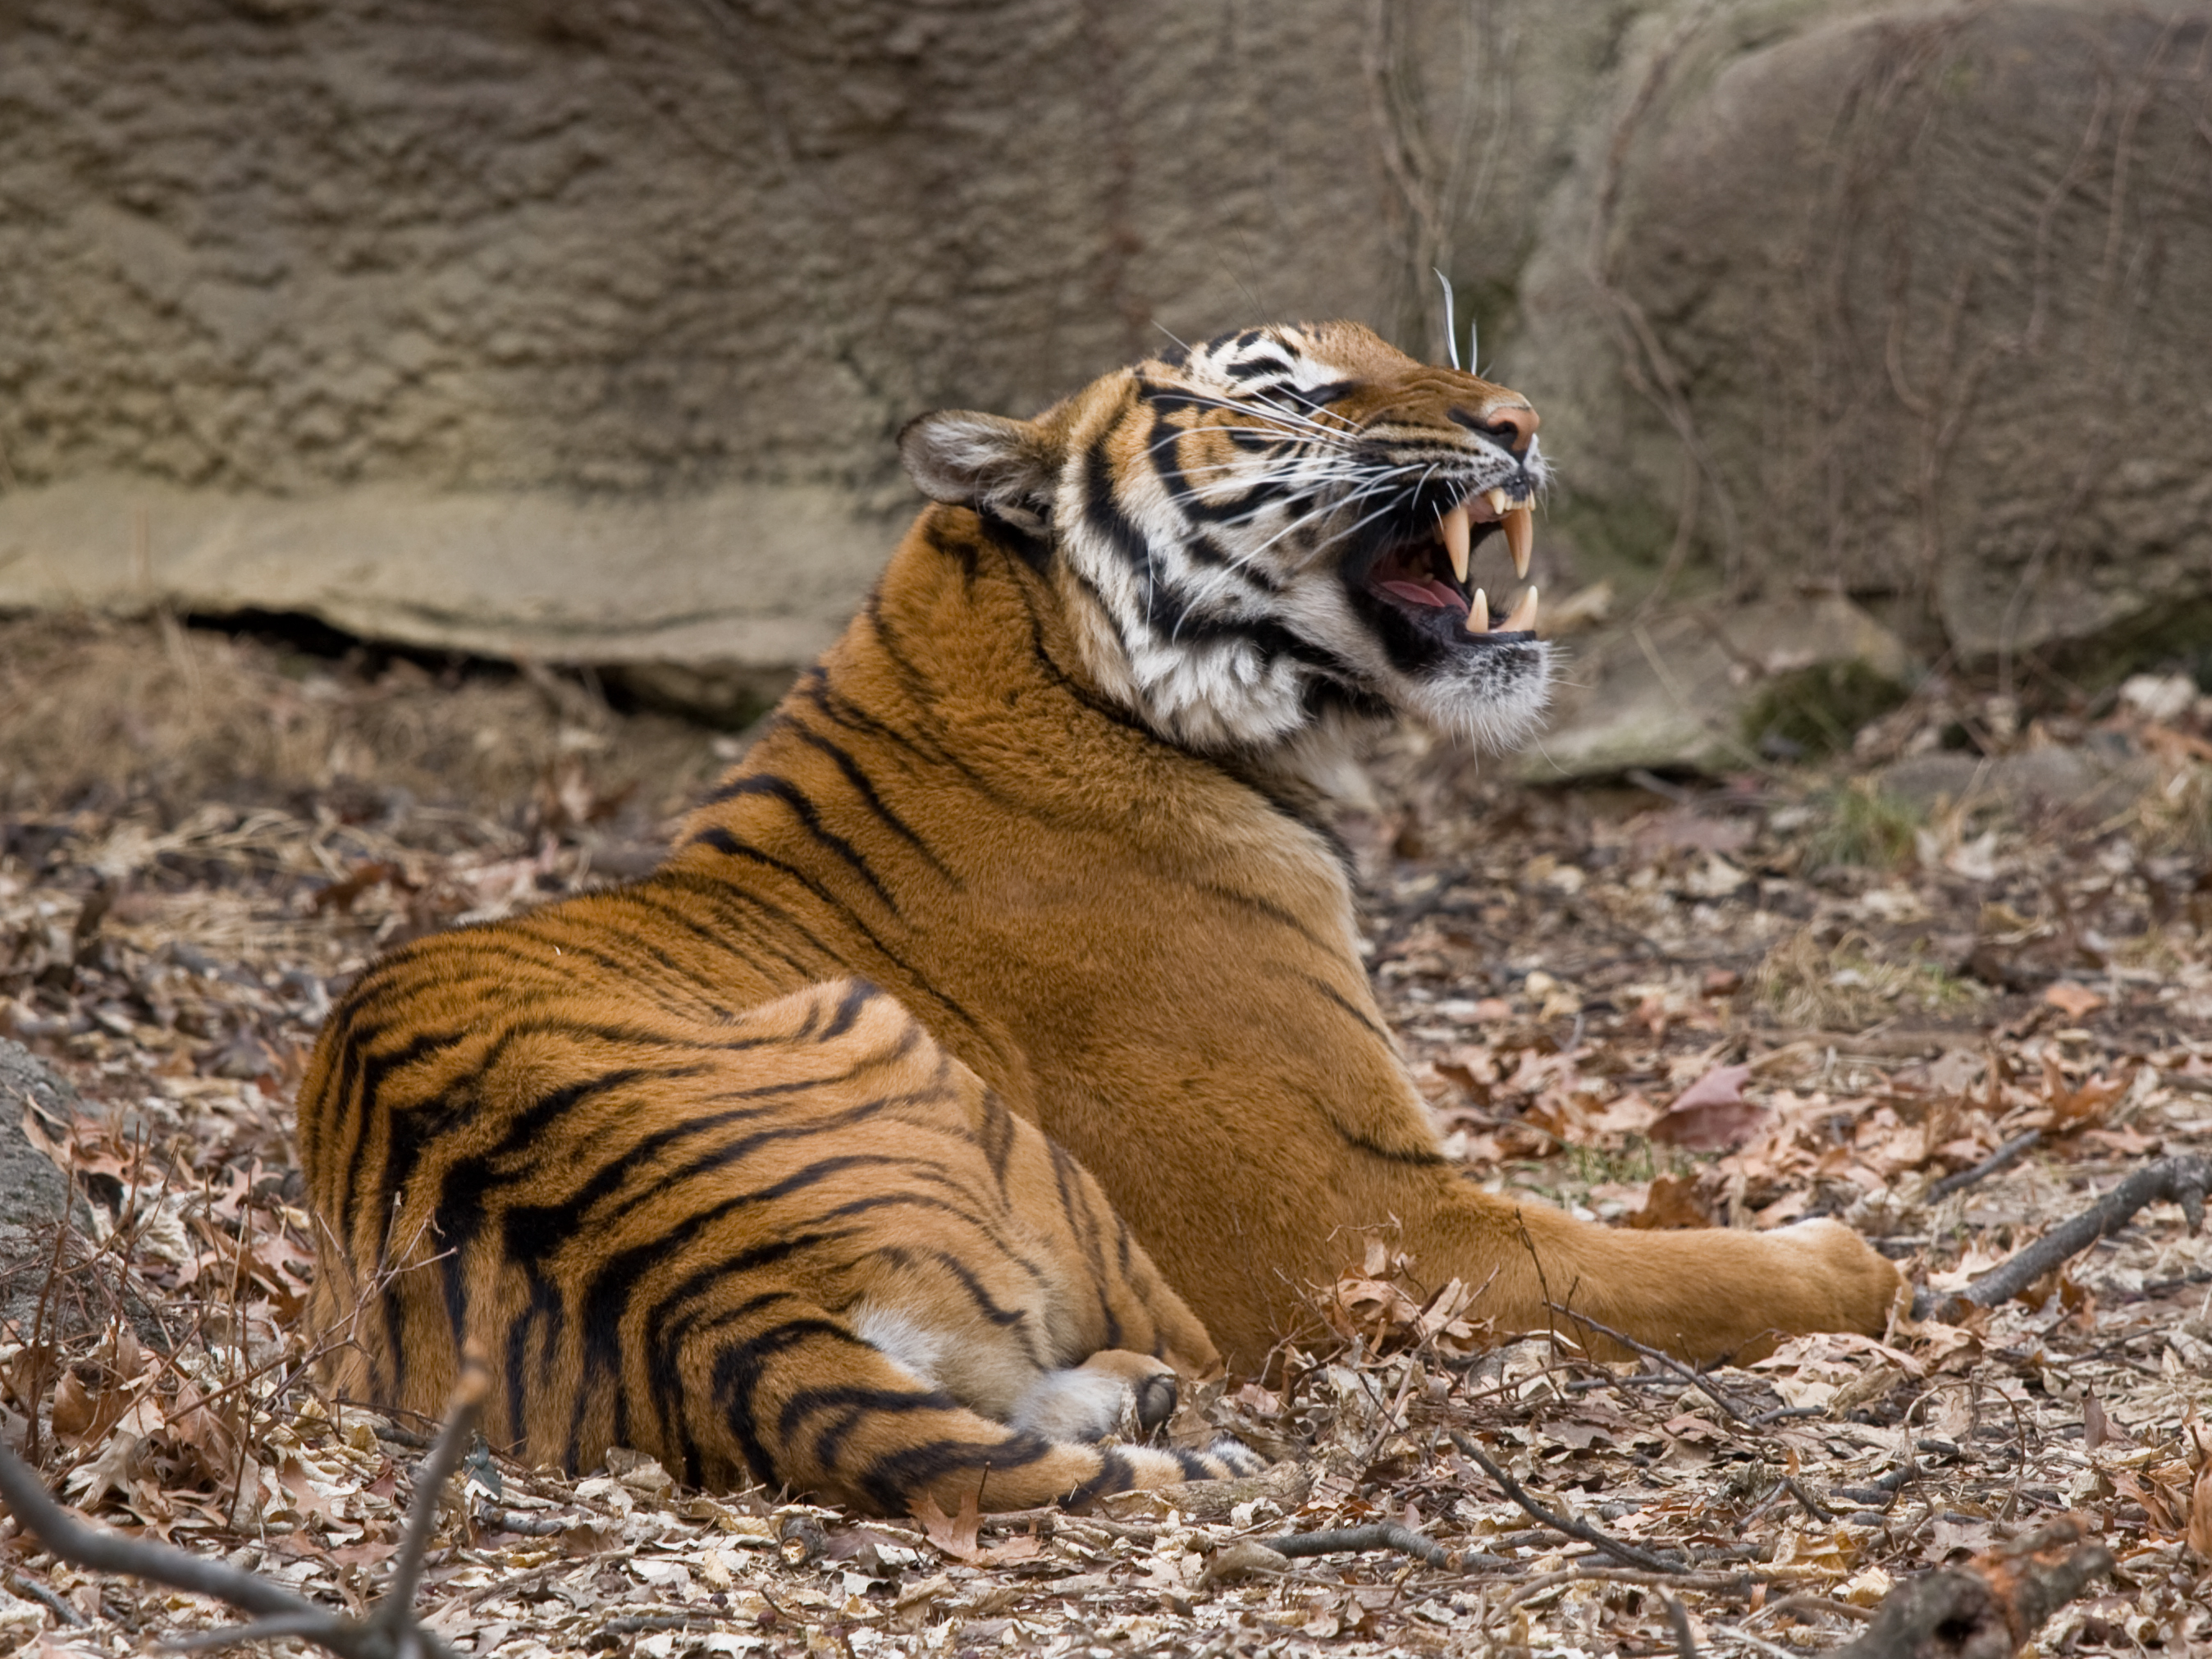 What is the average weight of a Malayan tiger?